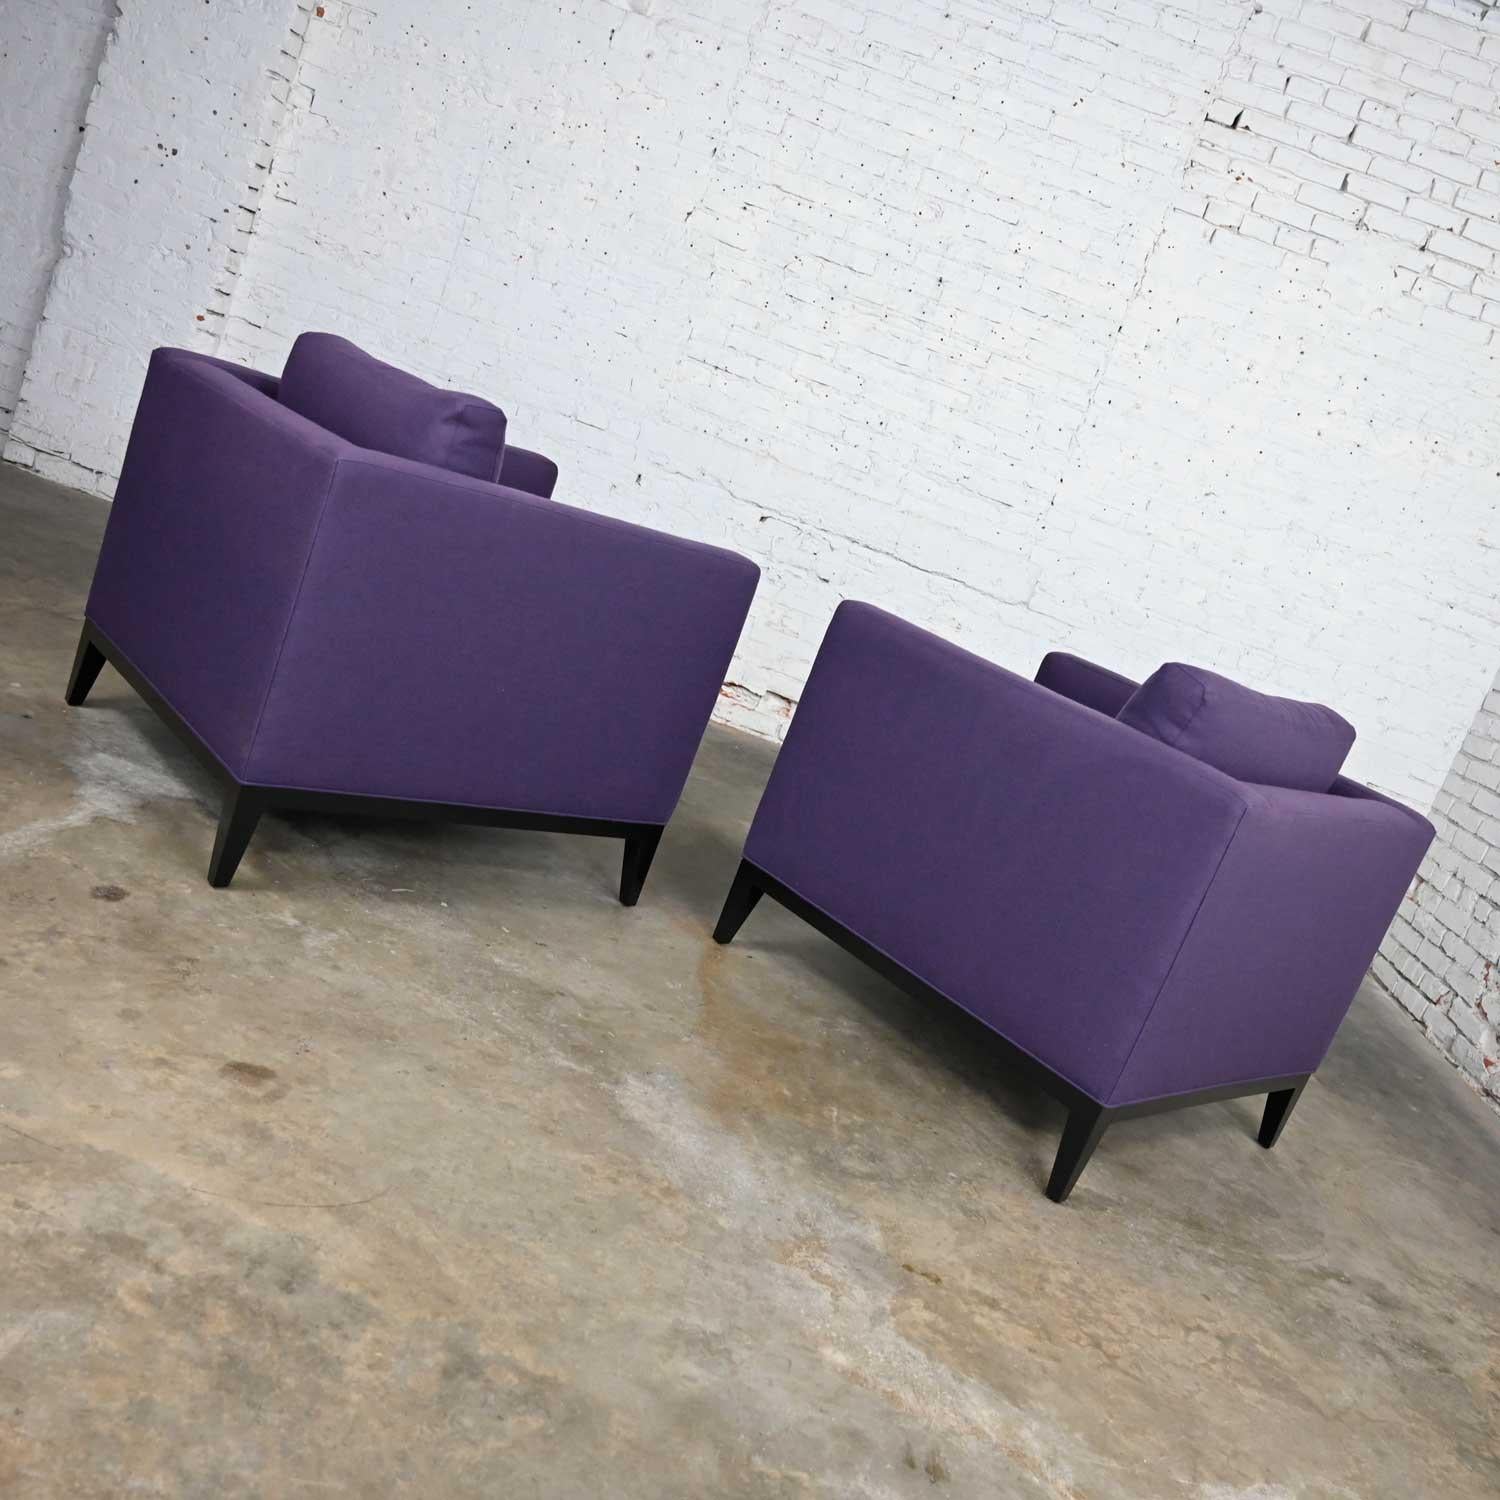 Fabric Modern Purple Plum Tone Tuxedo Style Club Chairs by Baker a Pair For Sale